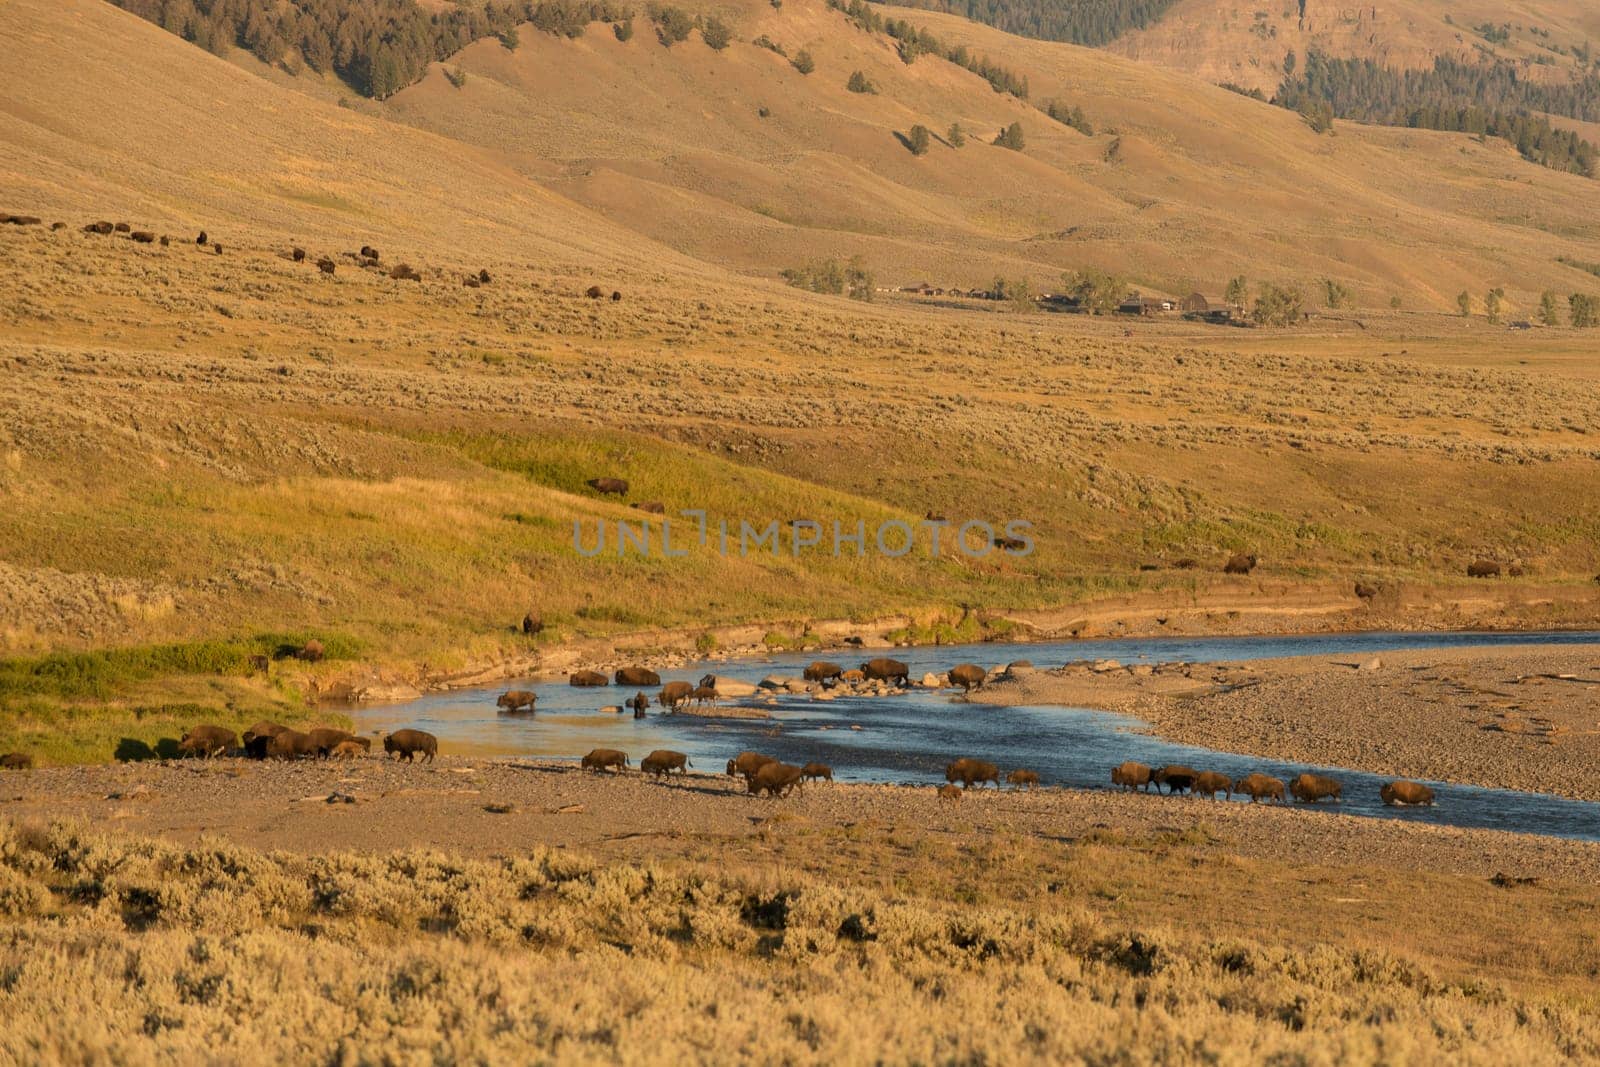 Buffalos in Yellowstone while crossing the river in Lamar valley during summer time